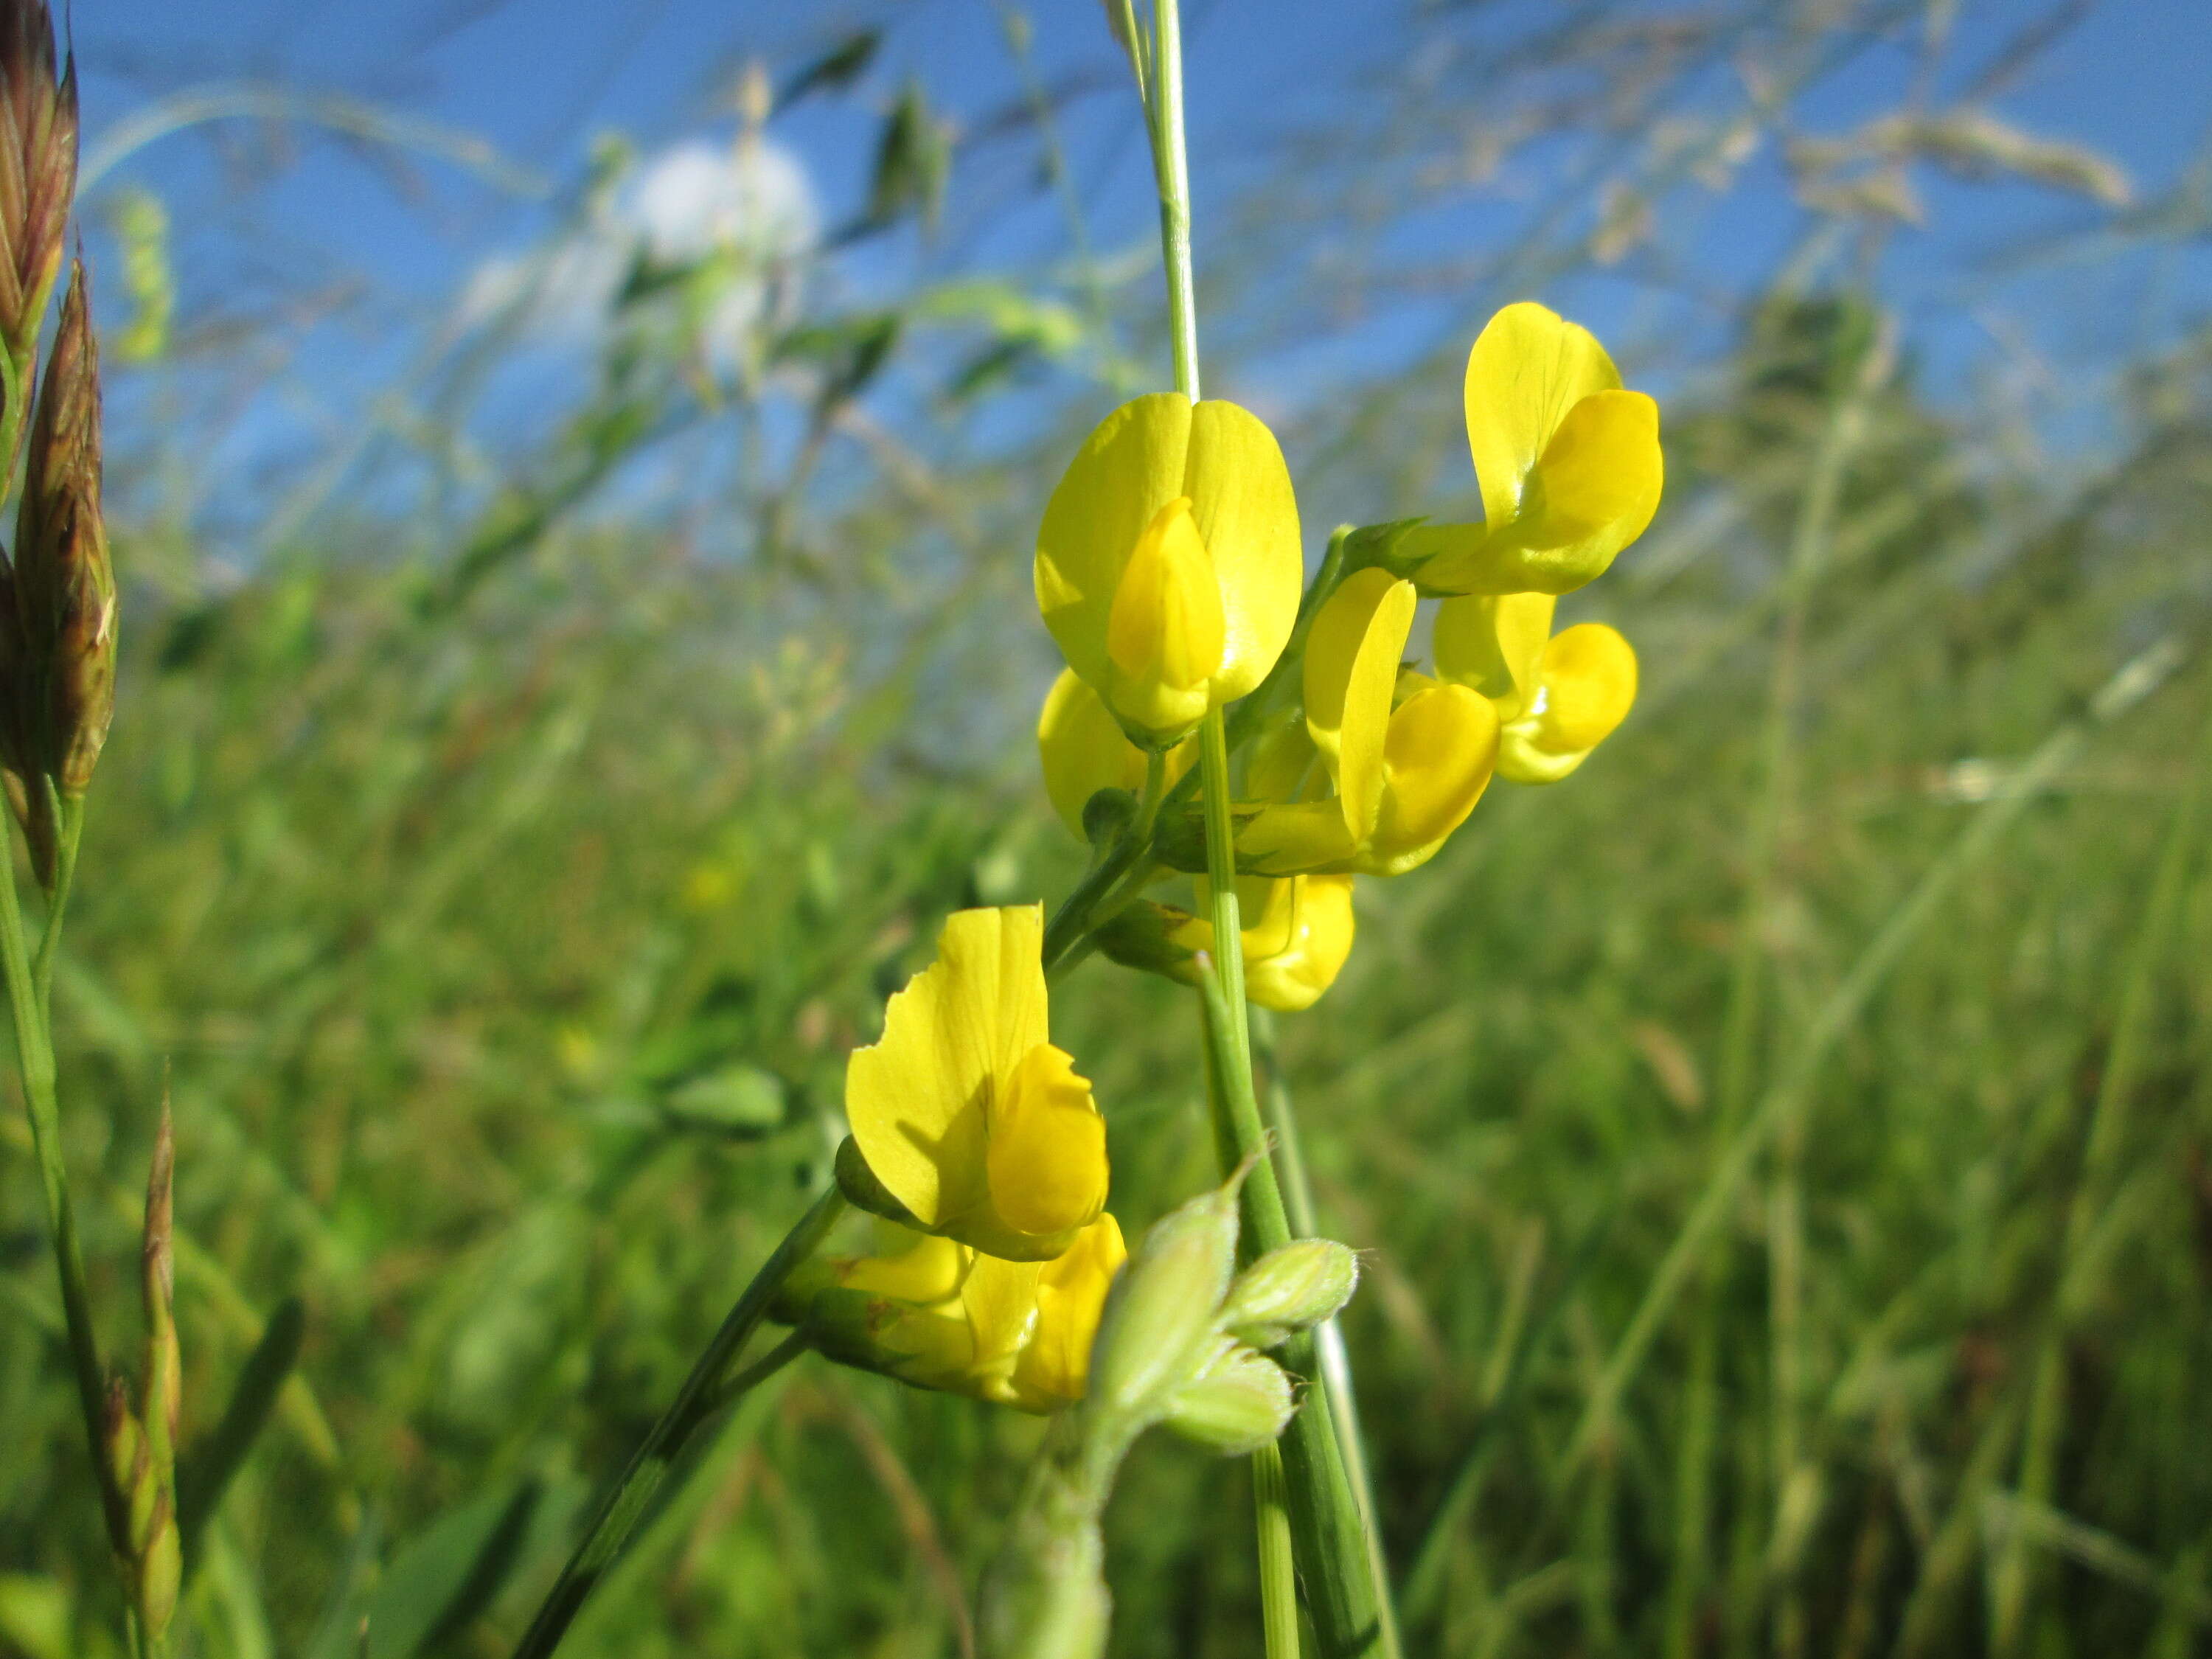 Image of meadow pea